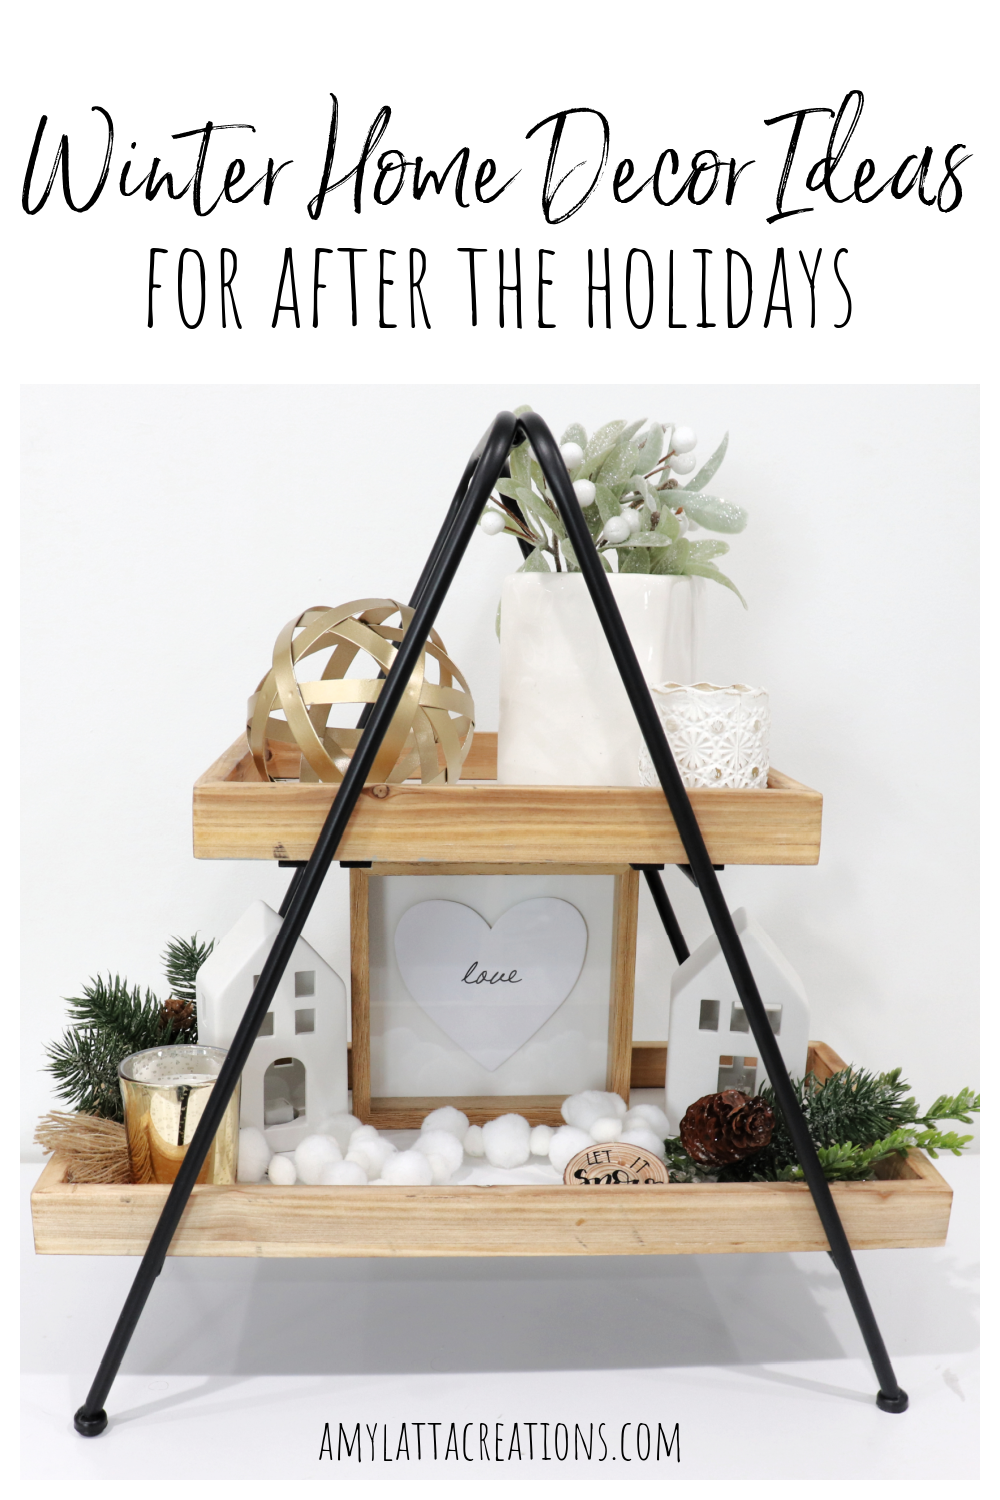 Image contains a two-tiered decorative tray styled with greenery and white and gold accents for winter.